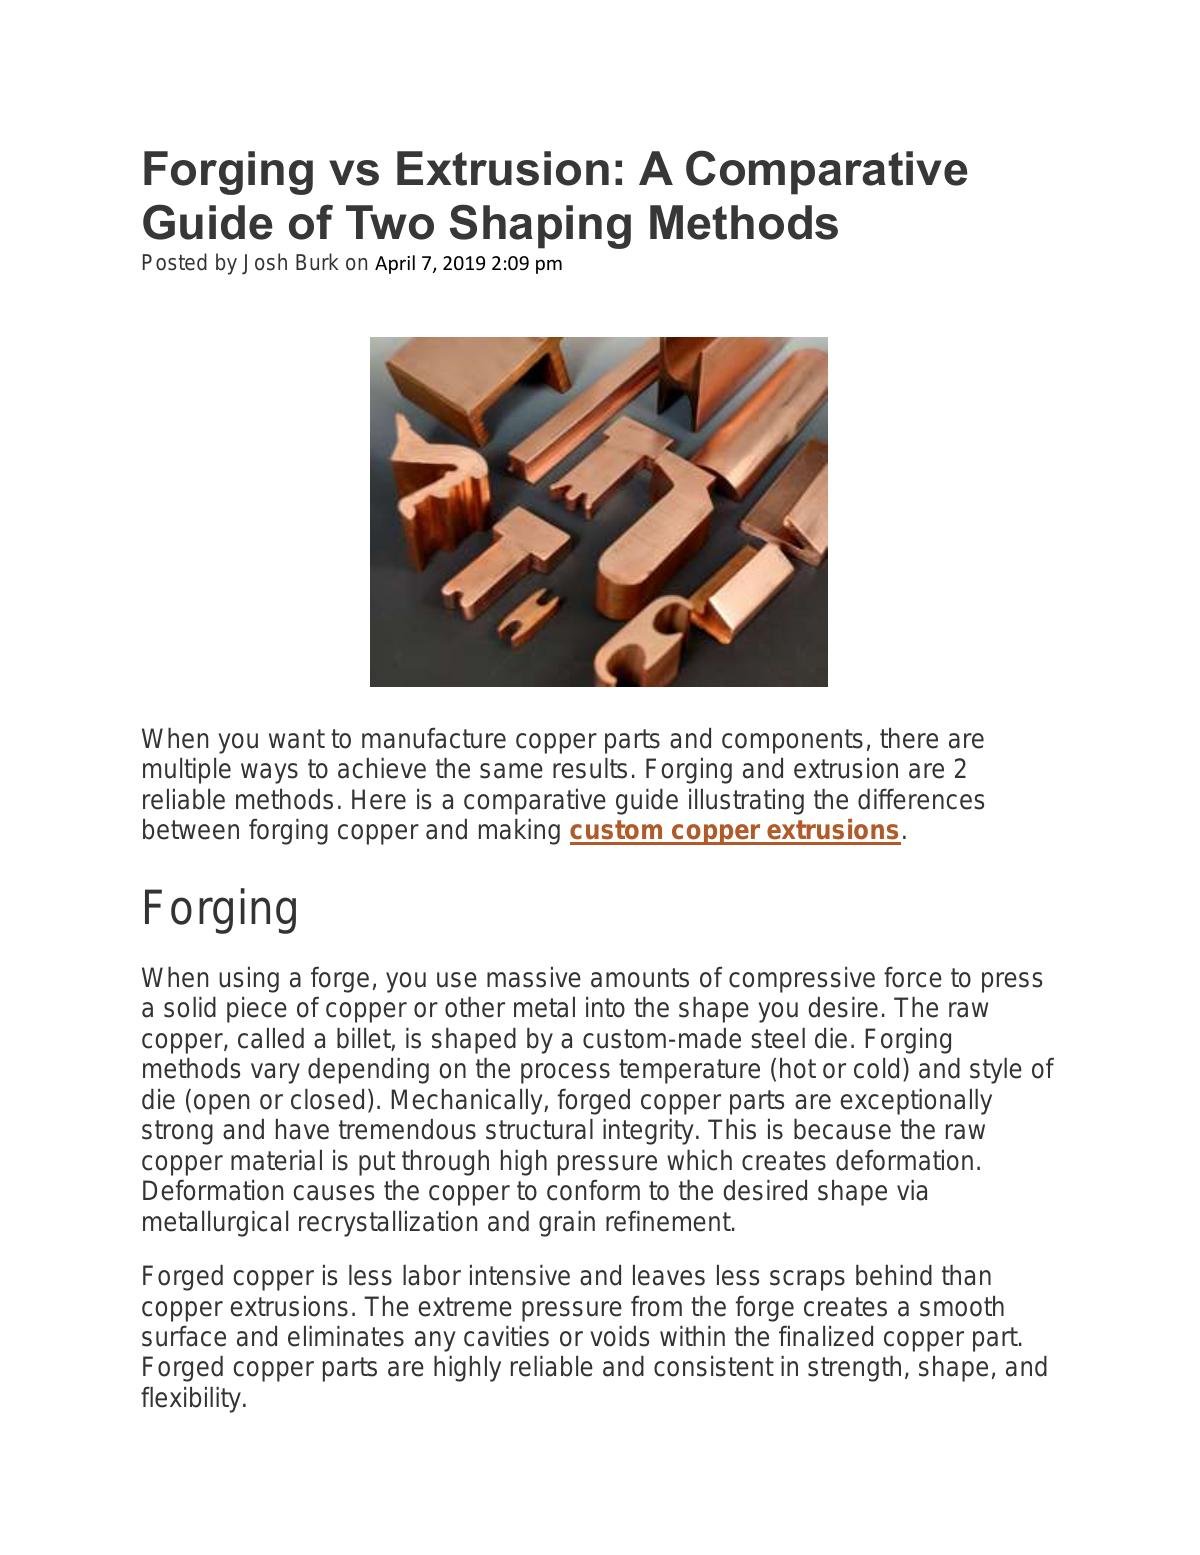 Forging vs Extrusion: A Comparative Guide of Two Shaping Methods